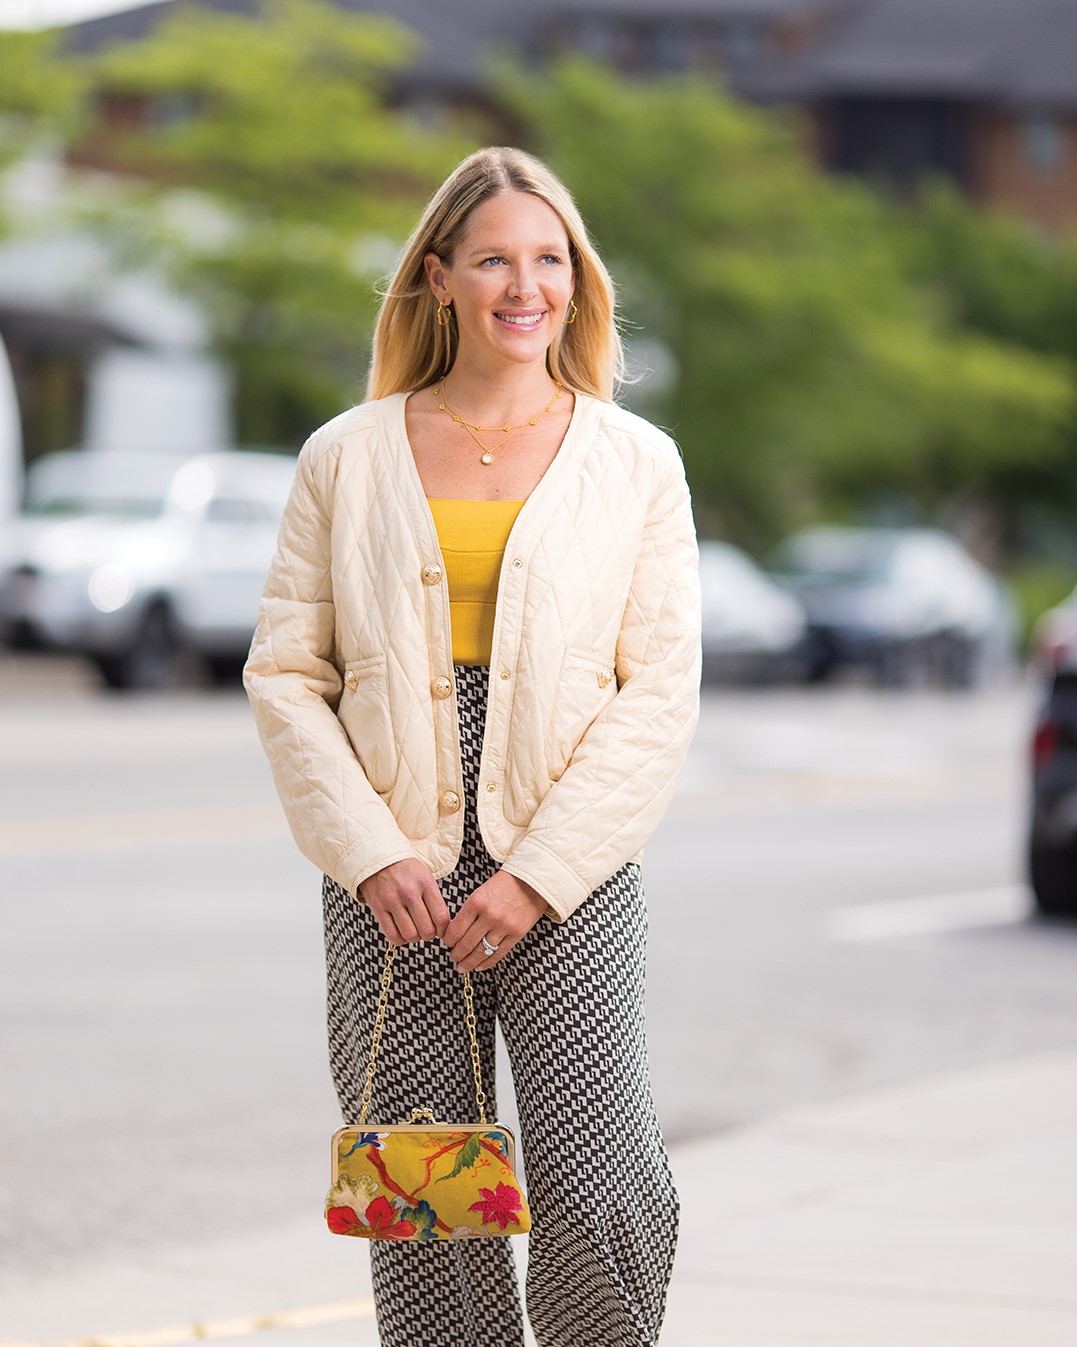 Fall City Walk Look — City Groove Pant: $59; Yellow Knit Tank: $39; Puffer Jacket: $148; Velvet Floral Clutch: $150; Spartina Hoop Earrings: $24